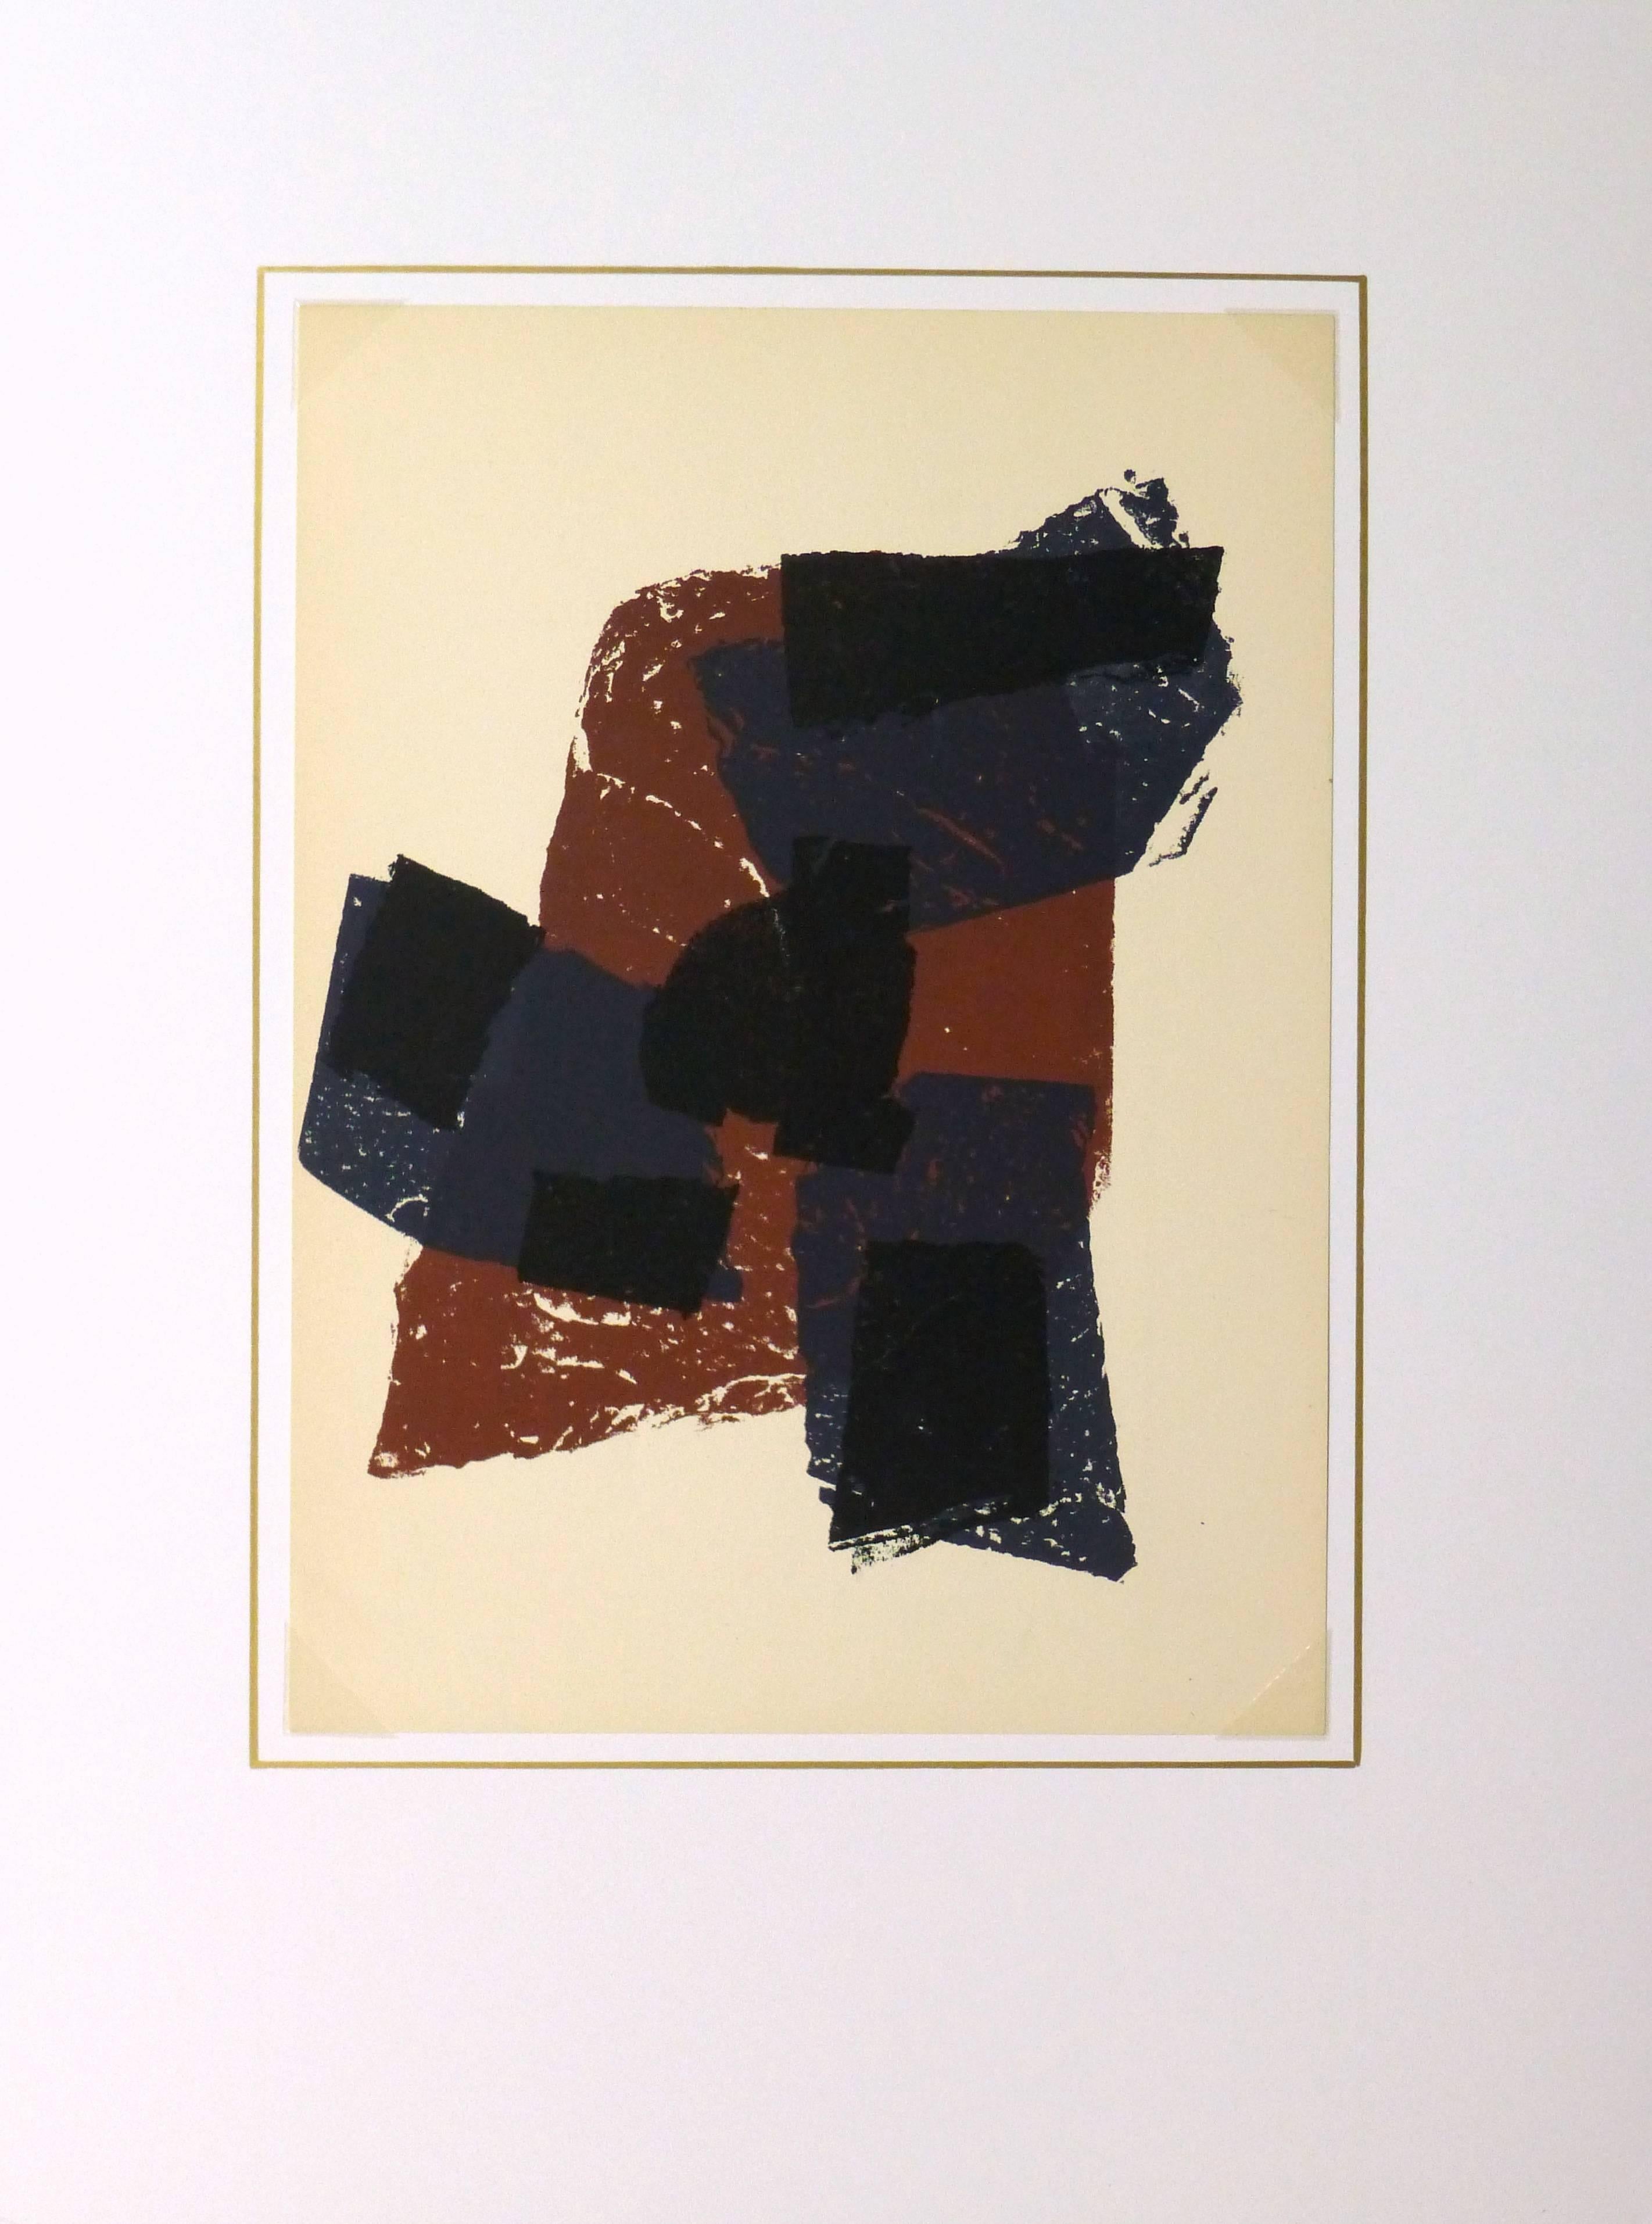 Impactful abstract stone lithograph of a mixture of textured shapes in hues of brick red, navy blue and black by French artist Raoul Ubac (1910-1985), 1966.

Original artwork on paper displayed on a white mat with a gold border. Mat fits a